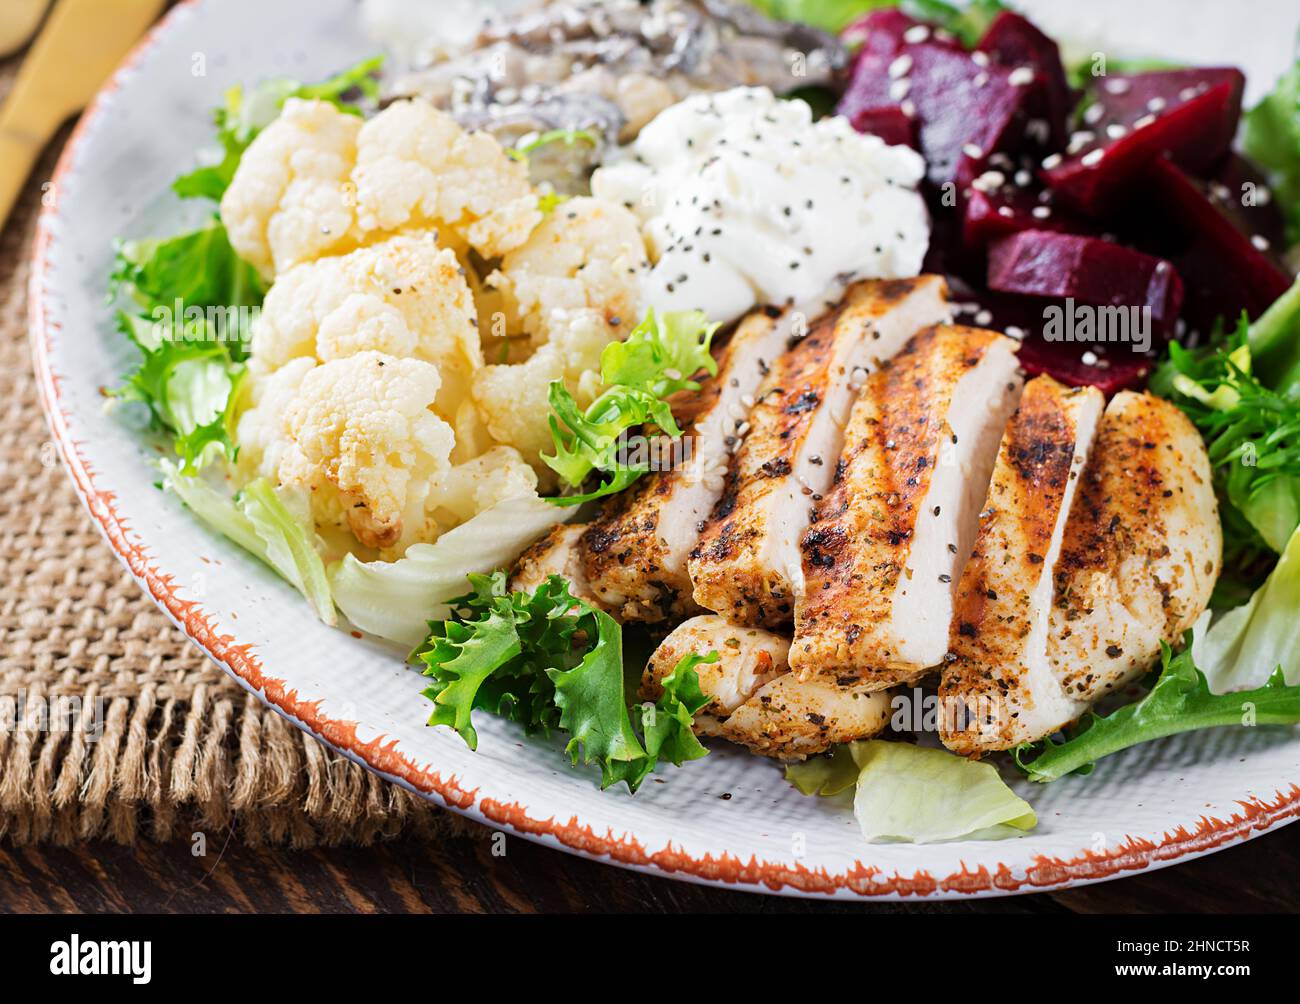 Healthy lunch. Boiled beetroot salad with greens, stewed mushrooms,  and grilled chicken fillet and baked cauliflower. Dinner. Stock Photo